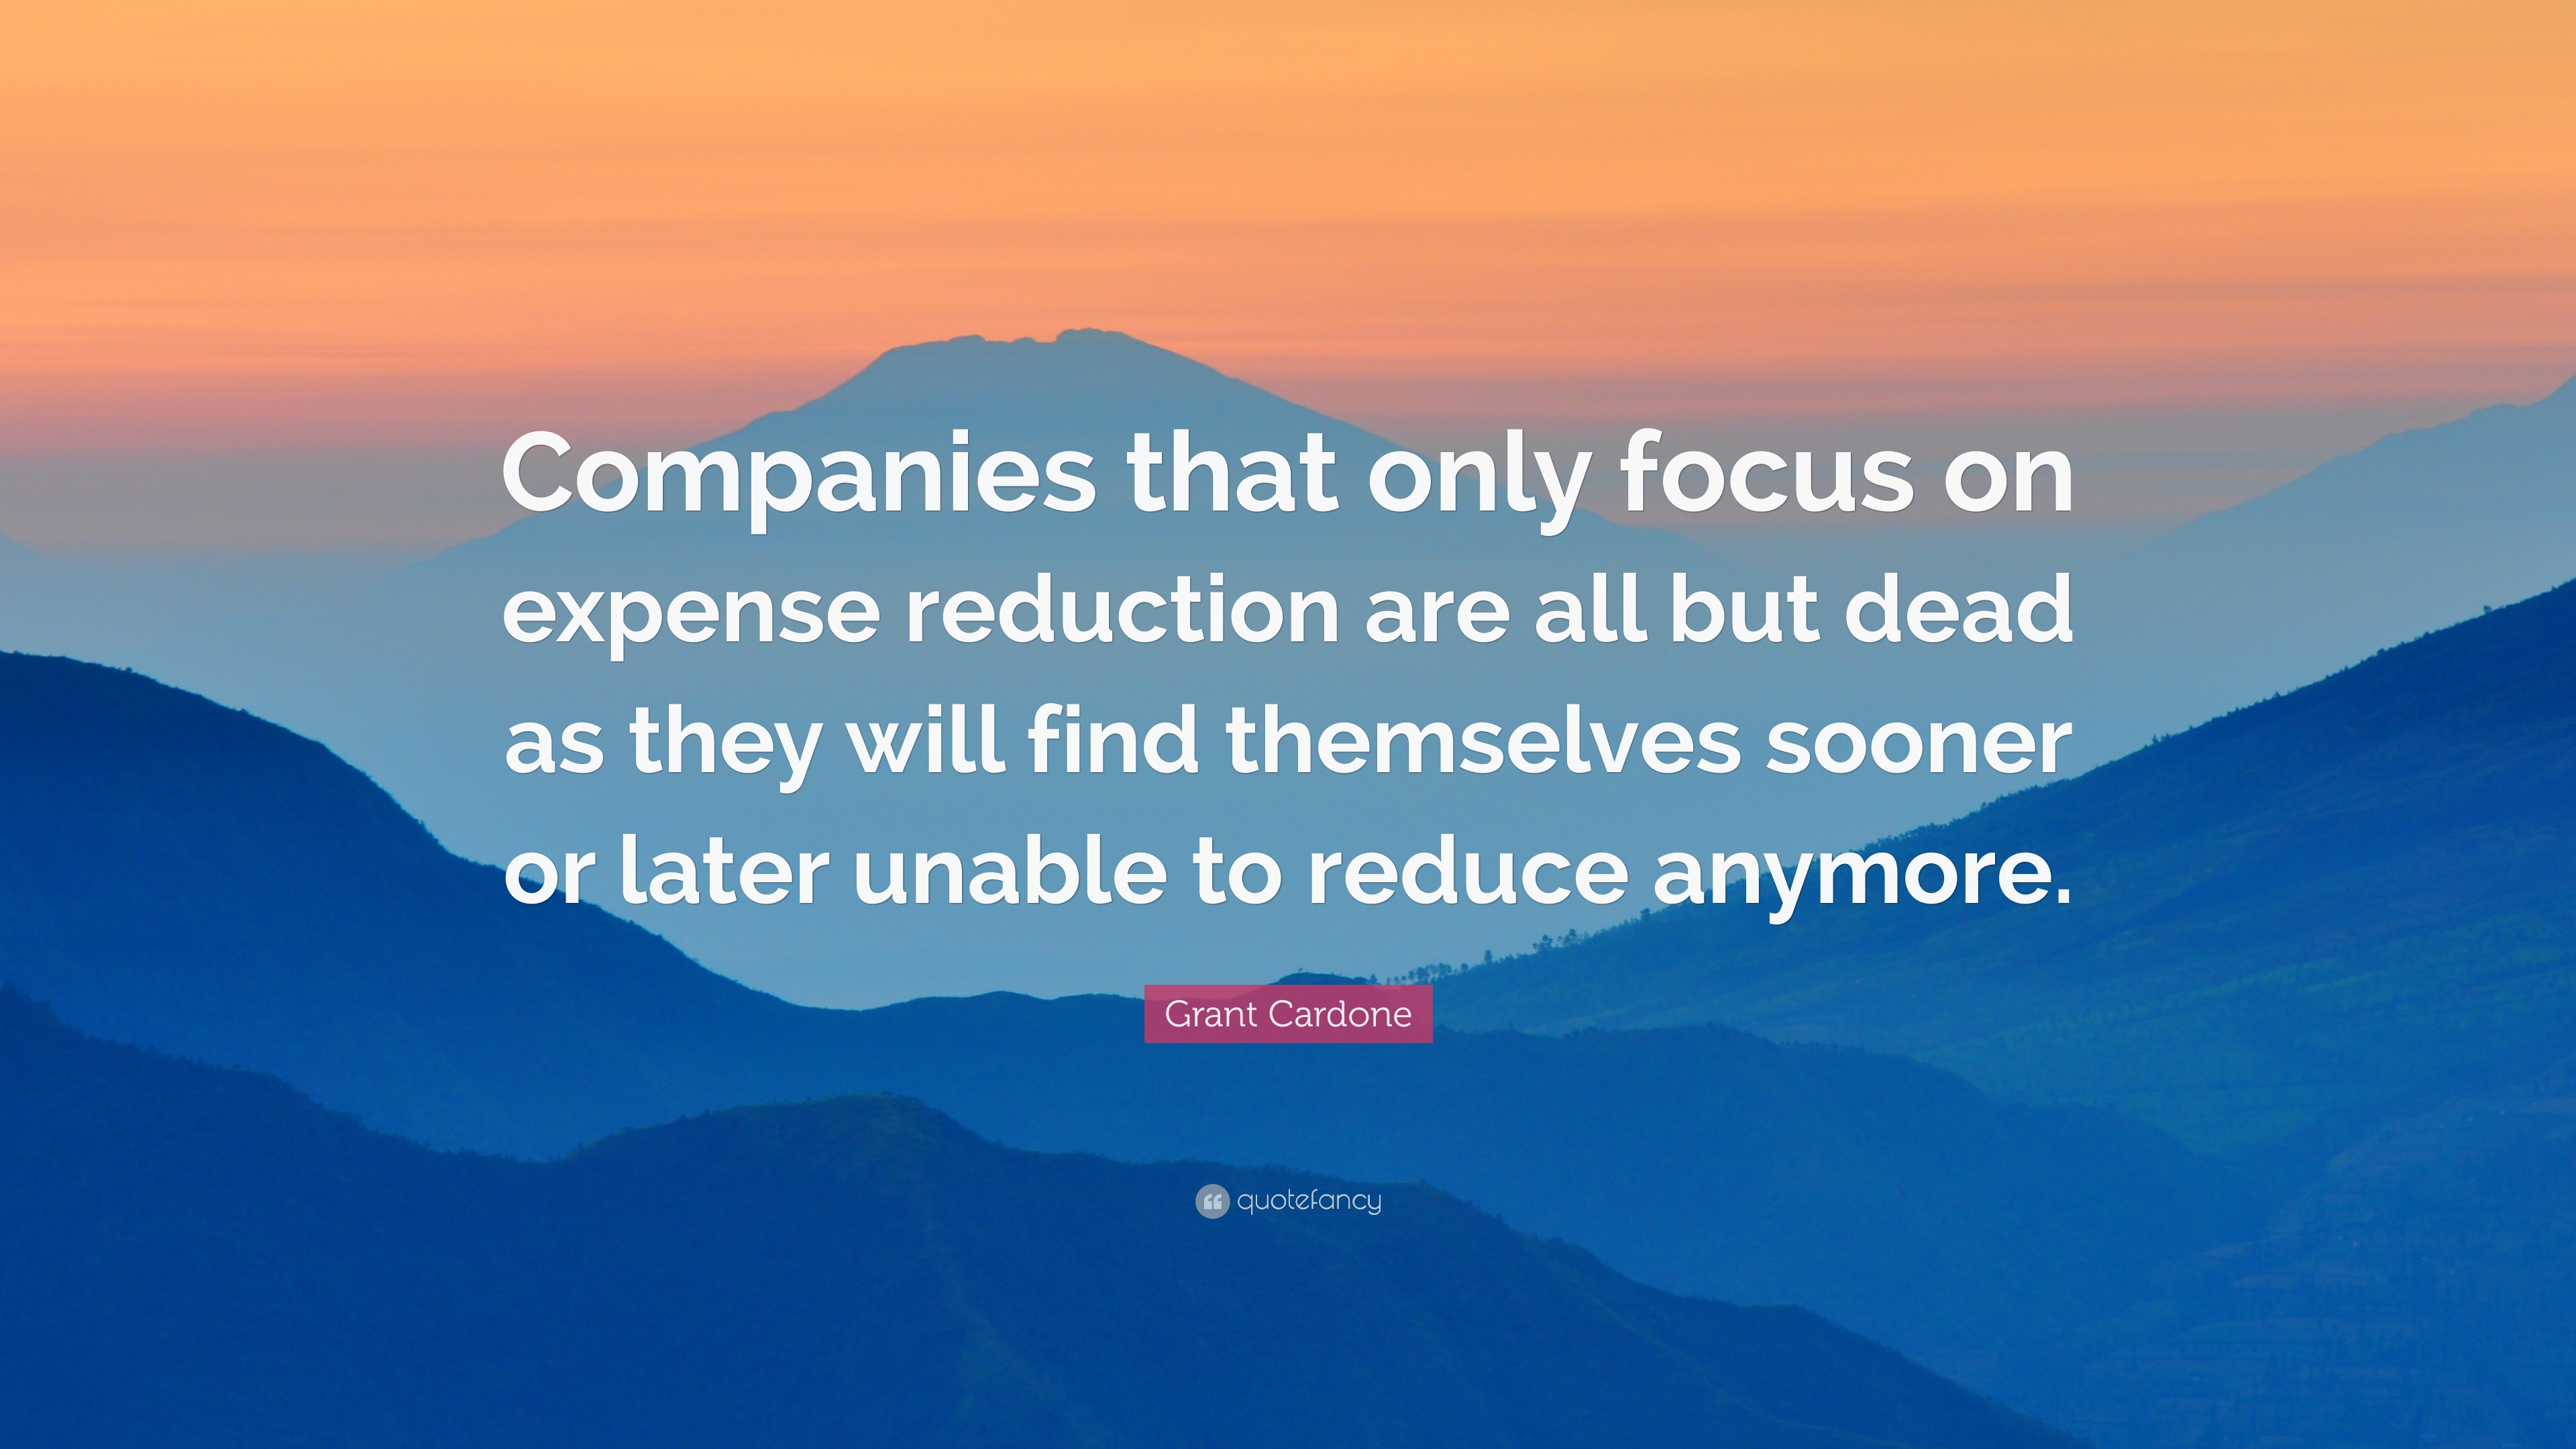 Grant Cardone Quote: “Companies that only focus on expense